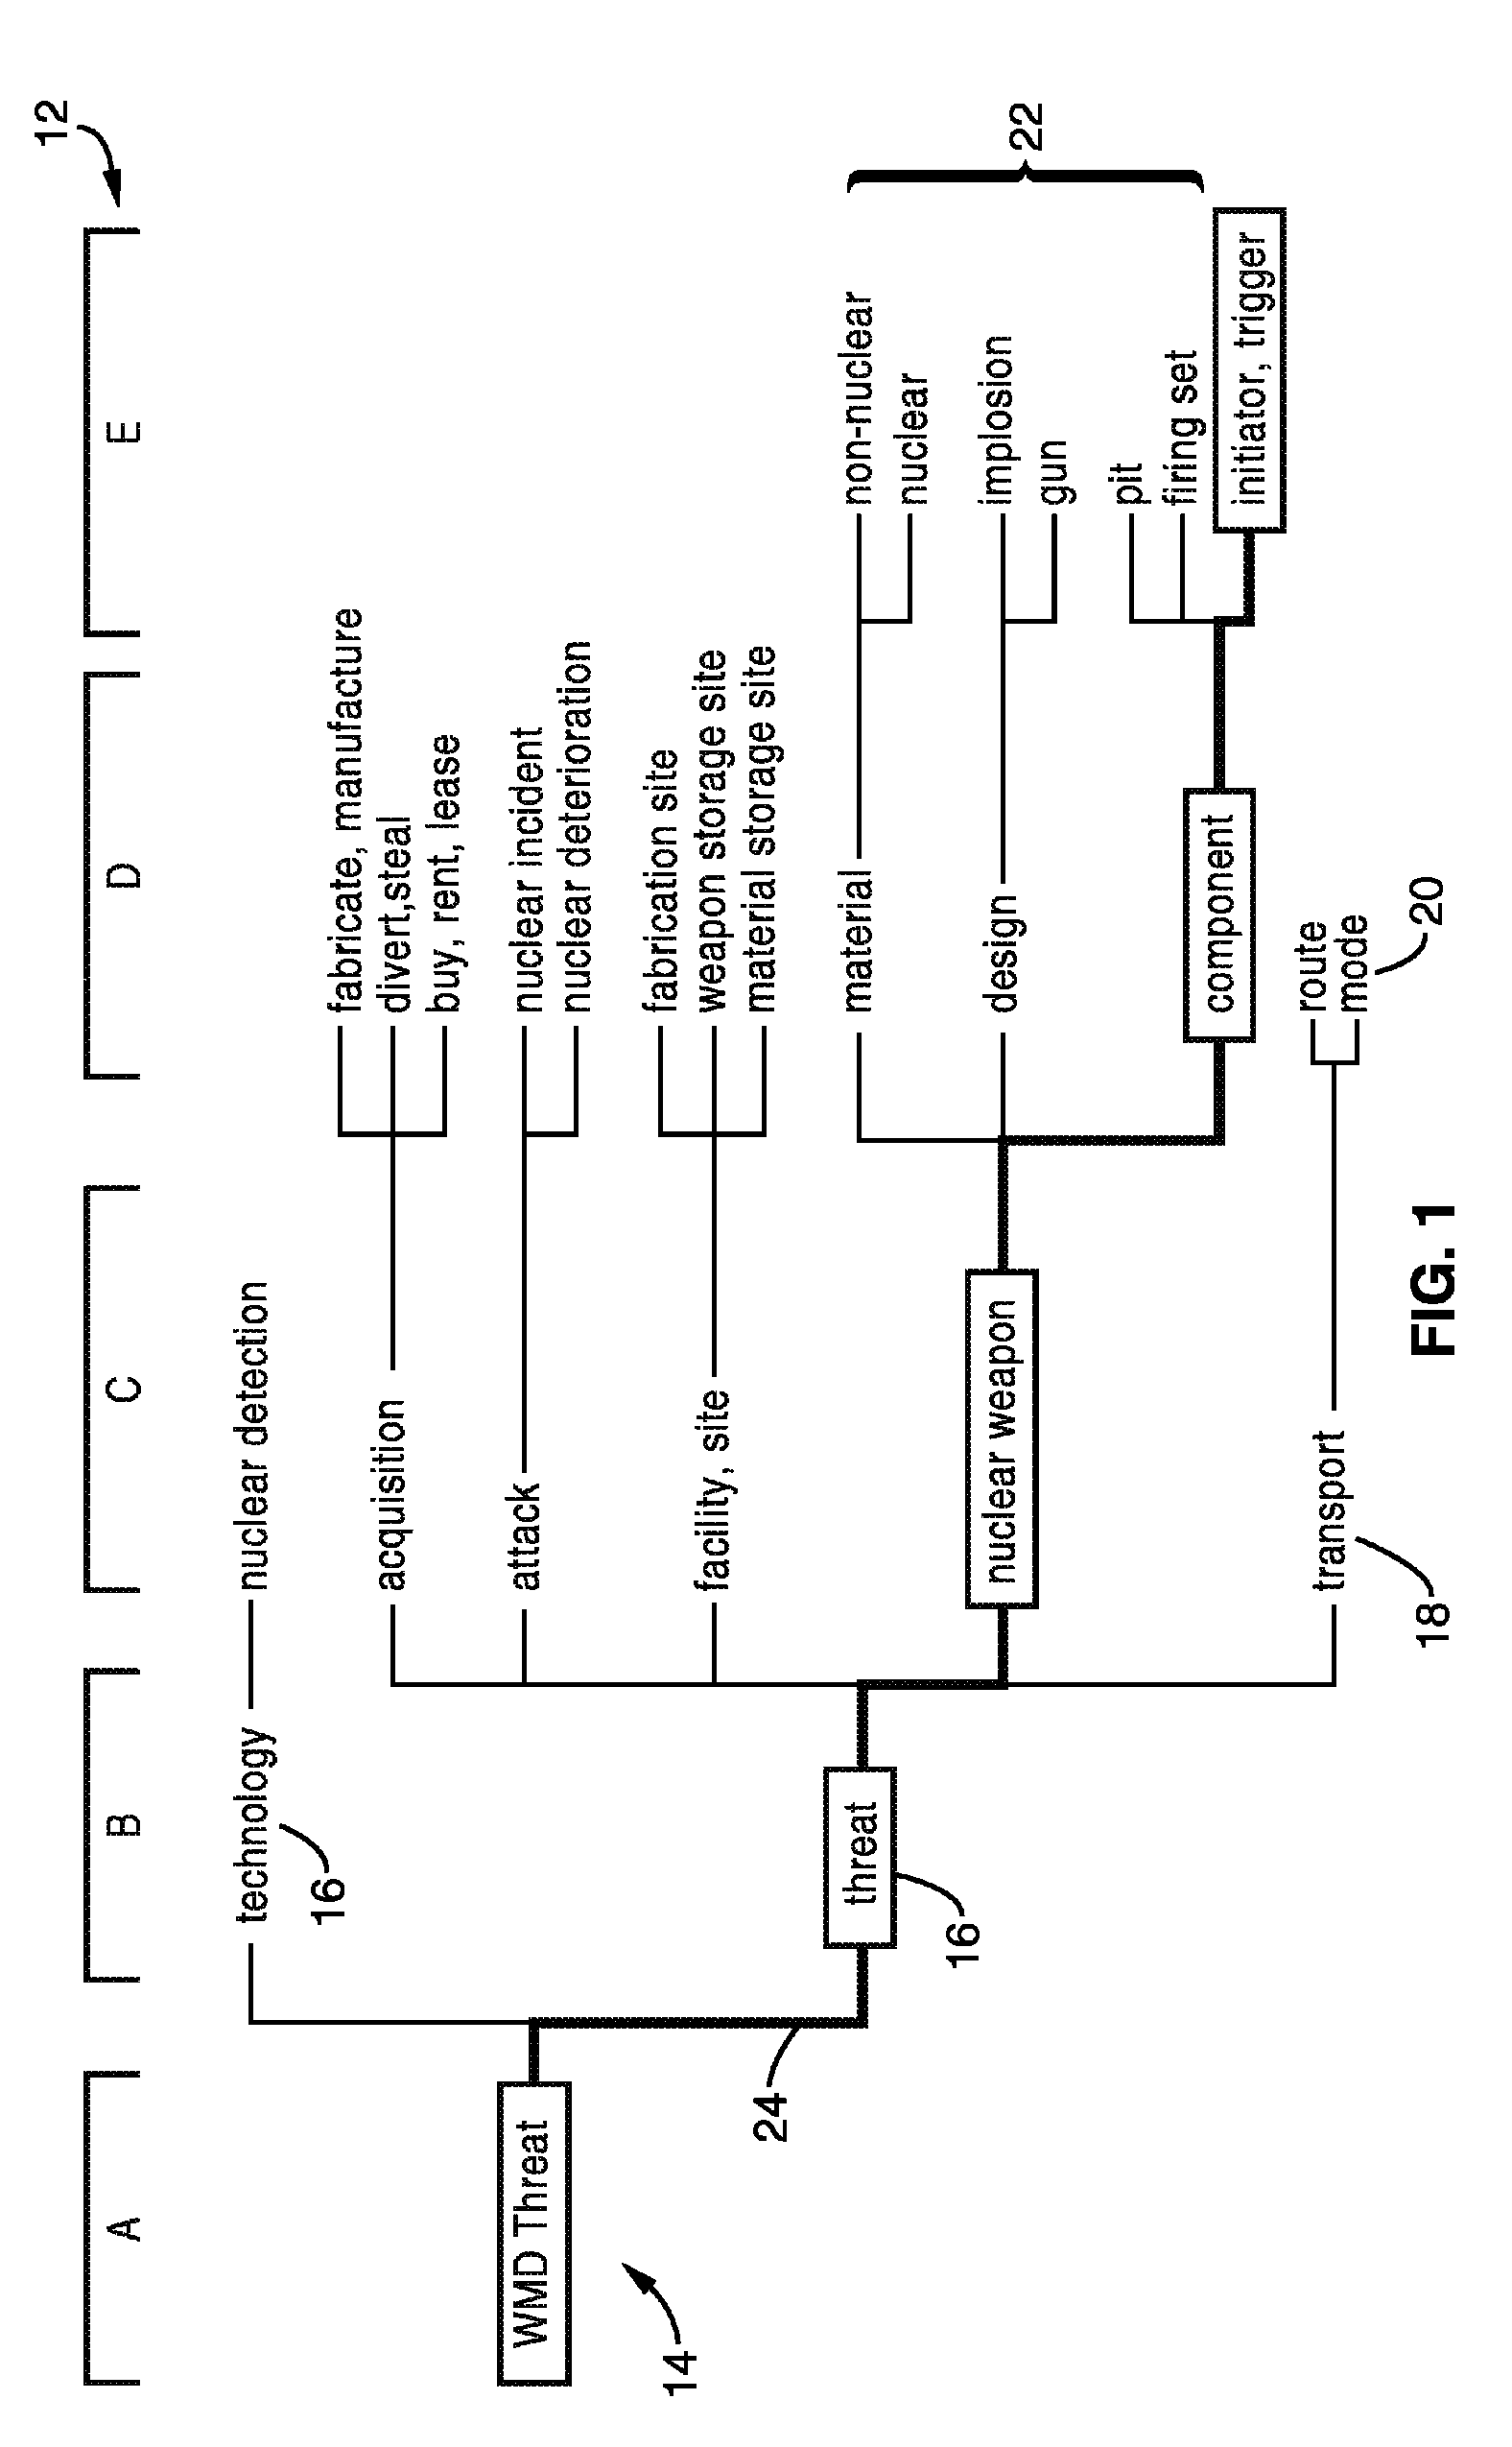 System and method for knowledge based matching of users in a network